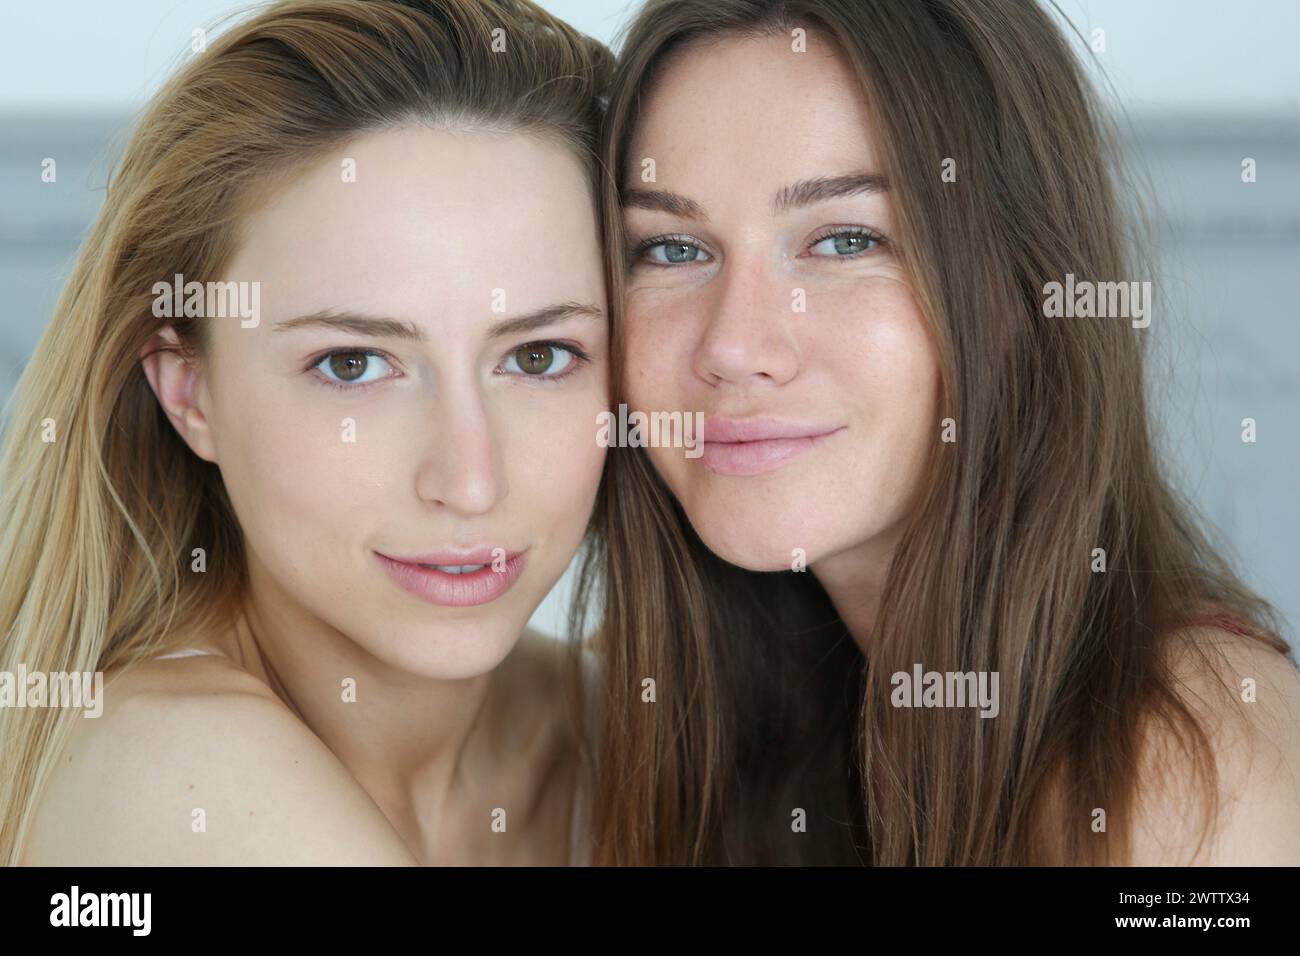 Two women posing closely with natural expressions. Stock Photo